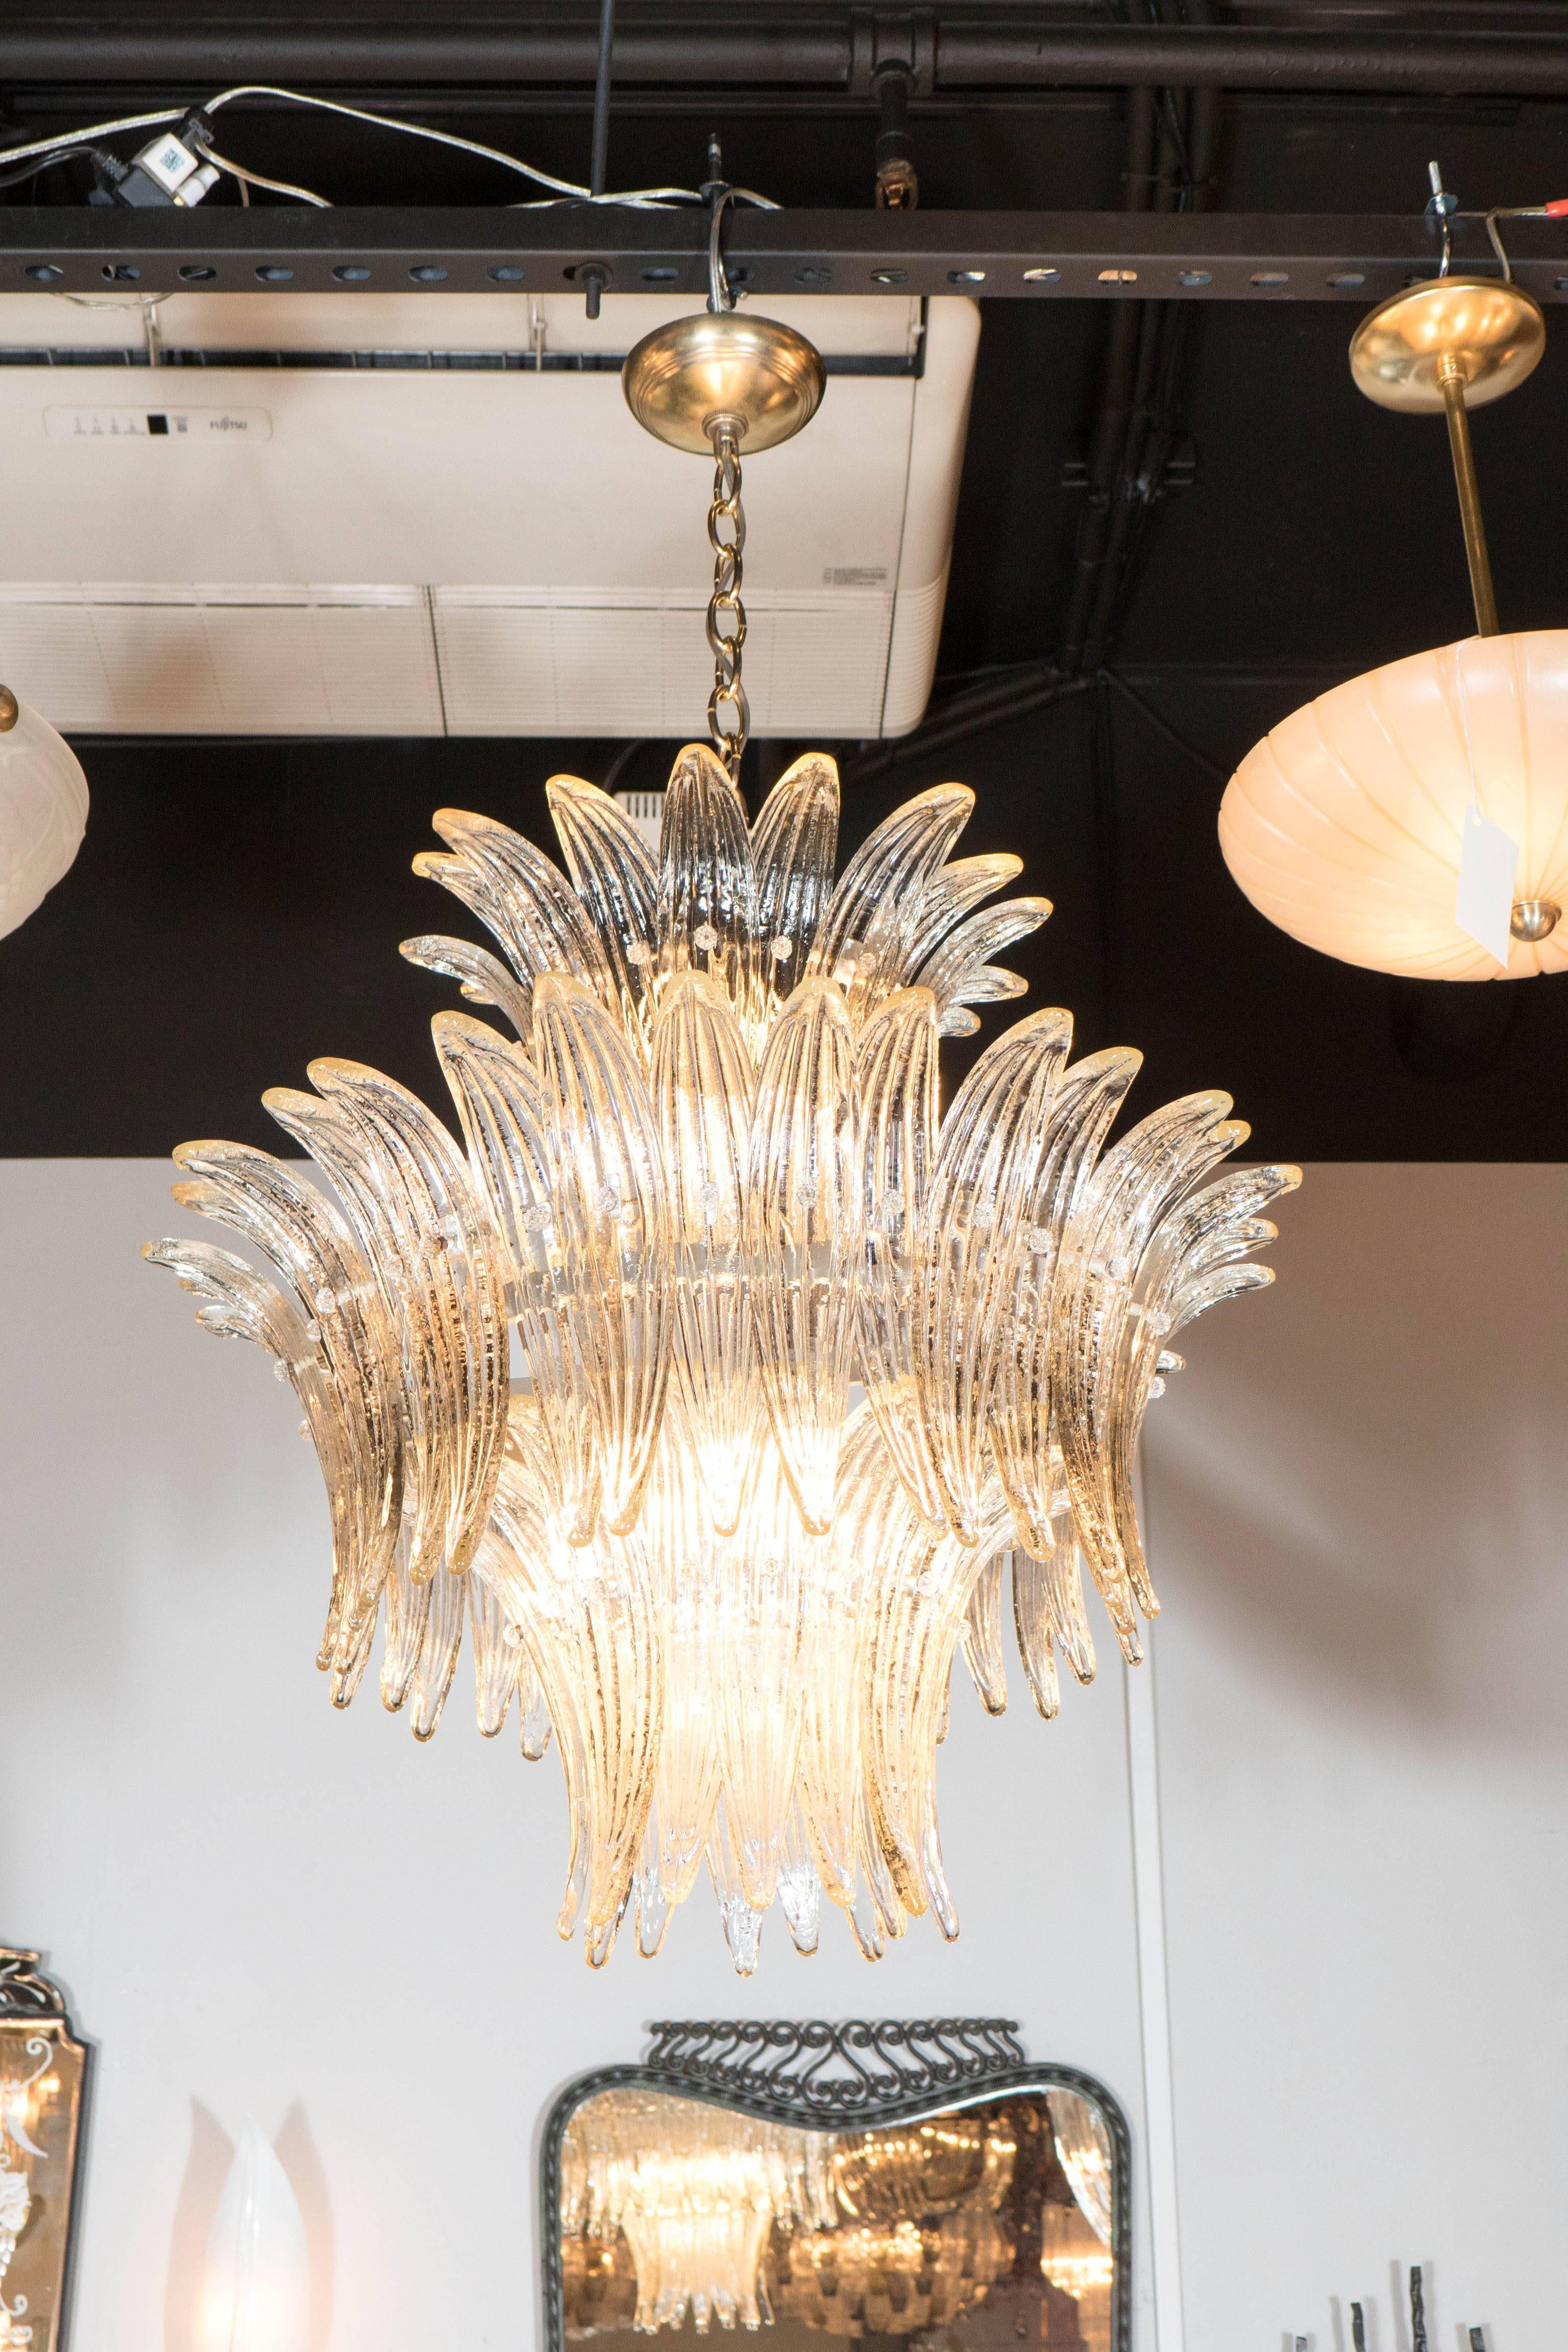 This gorgeous three-tier Palma chandelier was realized in Murano, Italy- the island off the coast of Venice renowned for centuries for its superlative glass production. It features an abundance of palm frond glass shades created in stunning hand